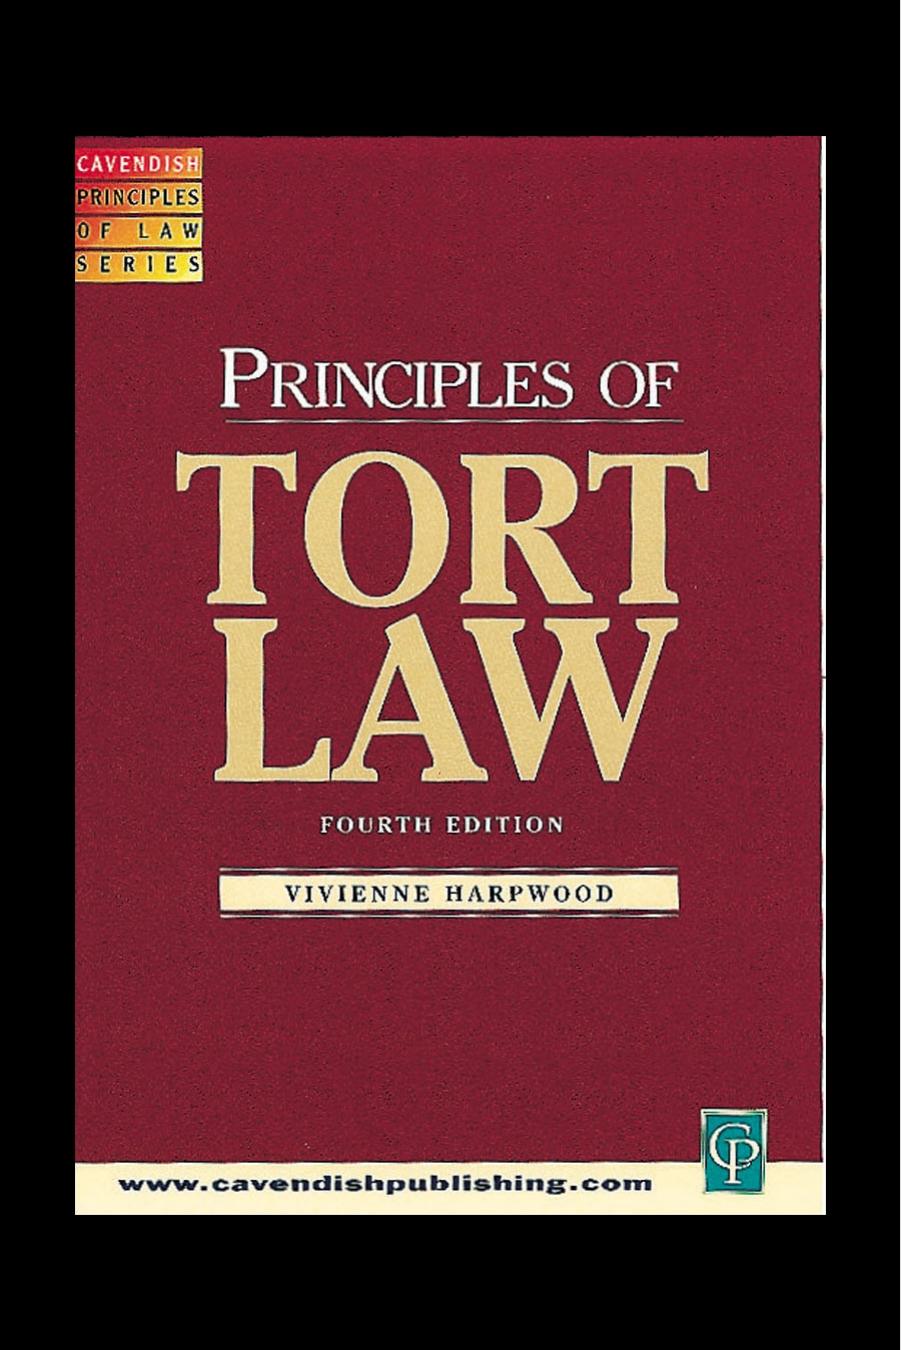 Principles of Tort Law, Fourth Edition